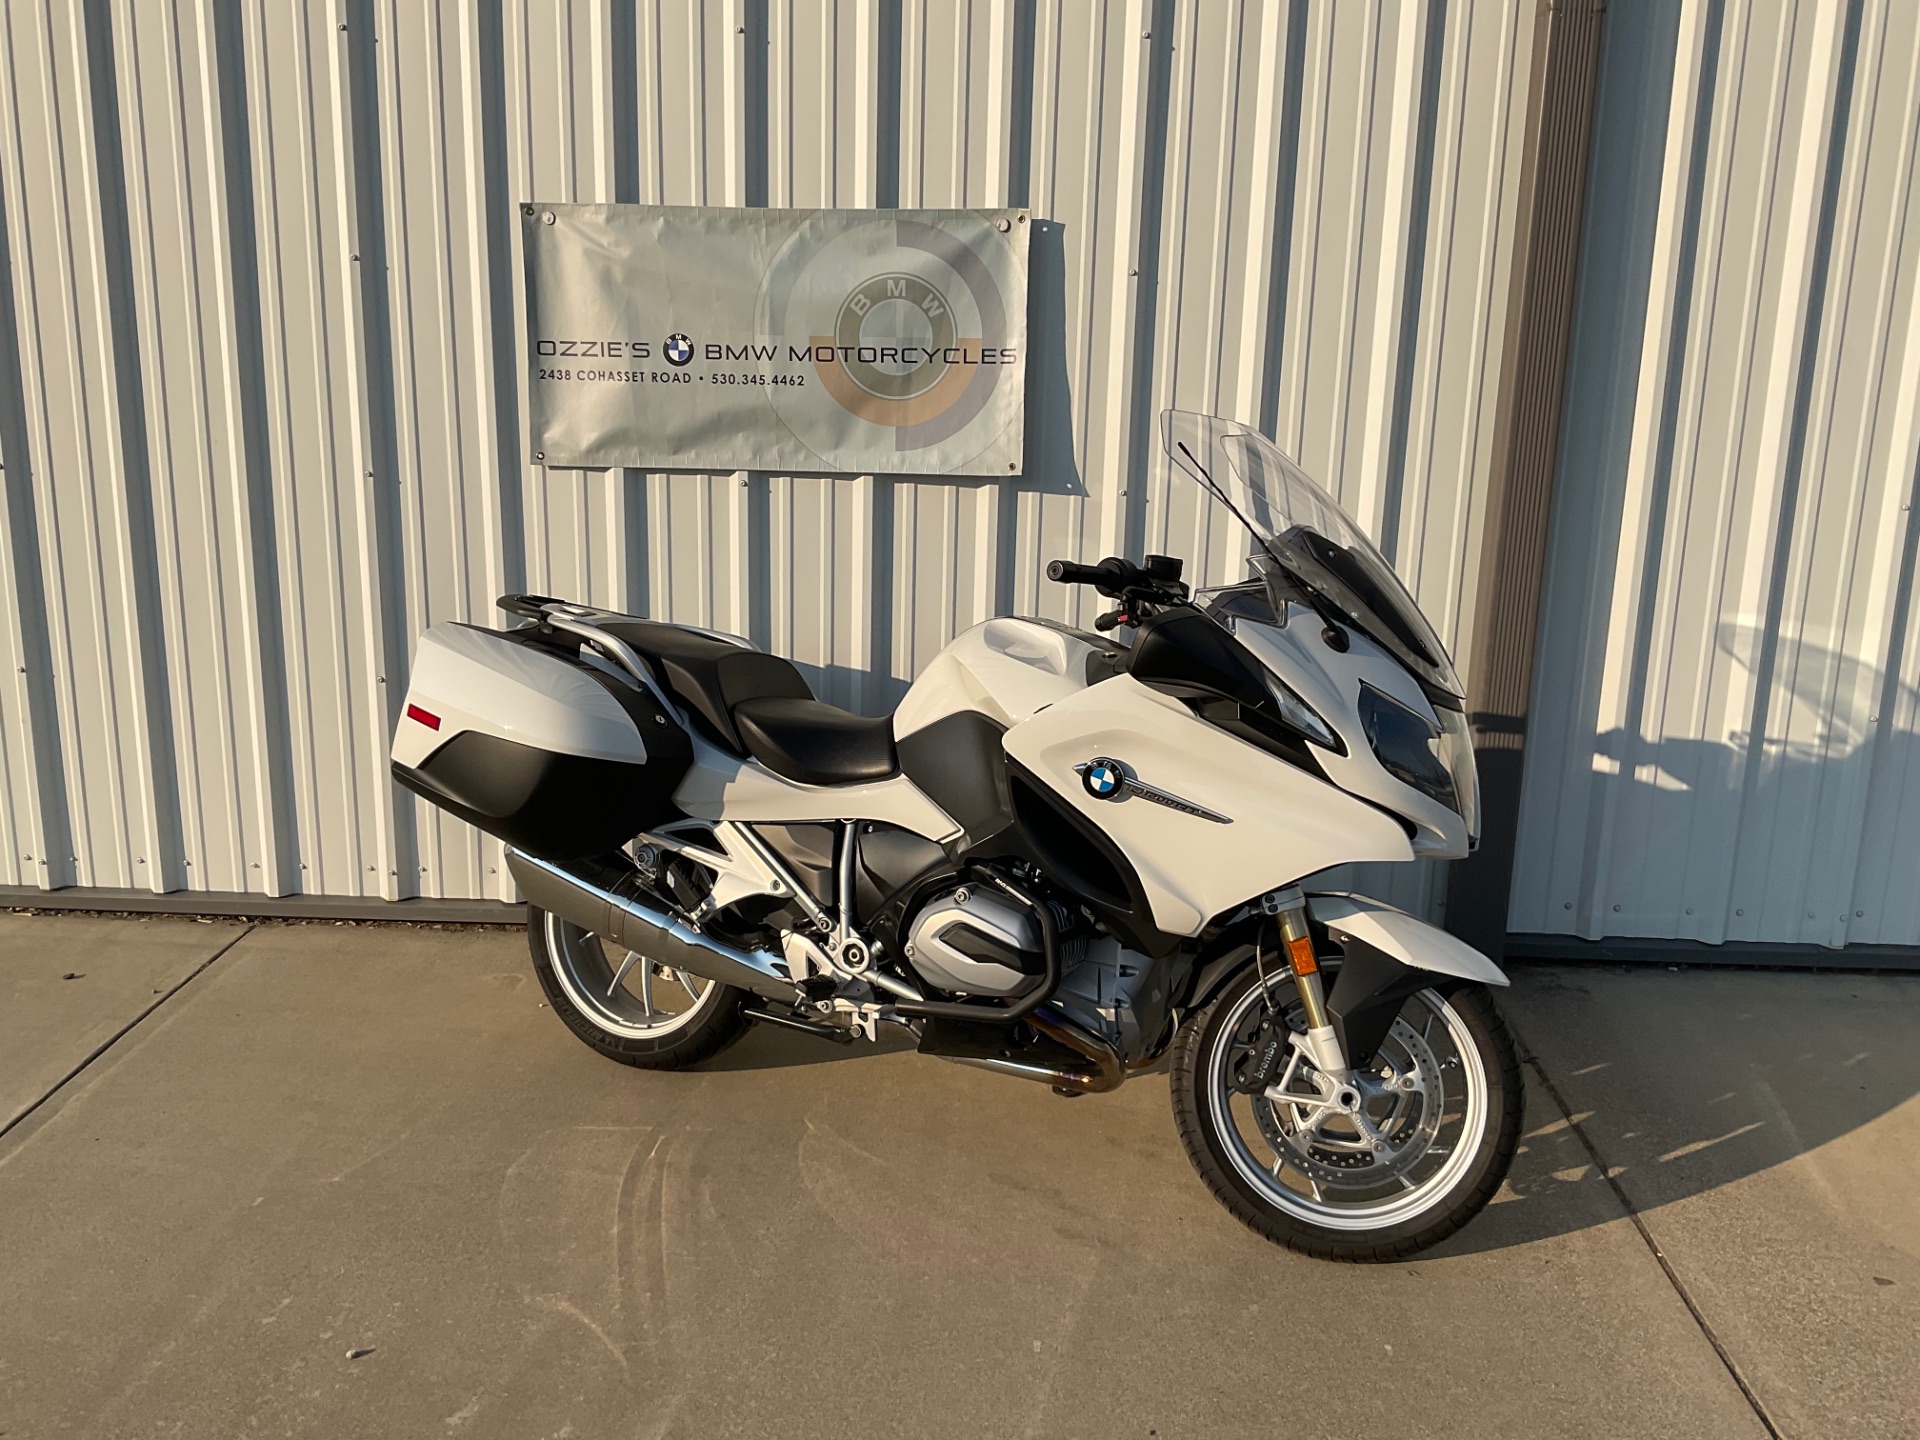 2018 BMW R 1200 RT in Chico, California - Photo 1